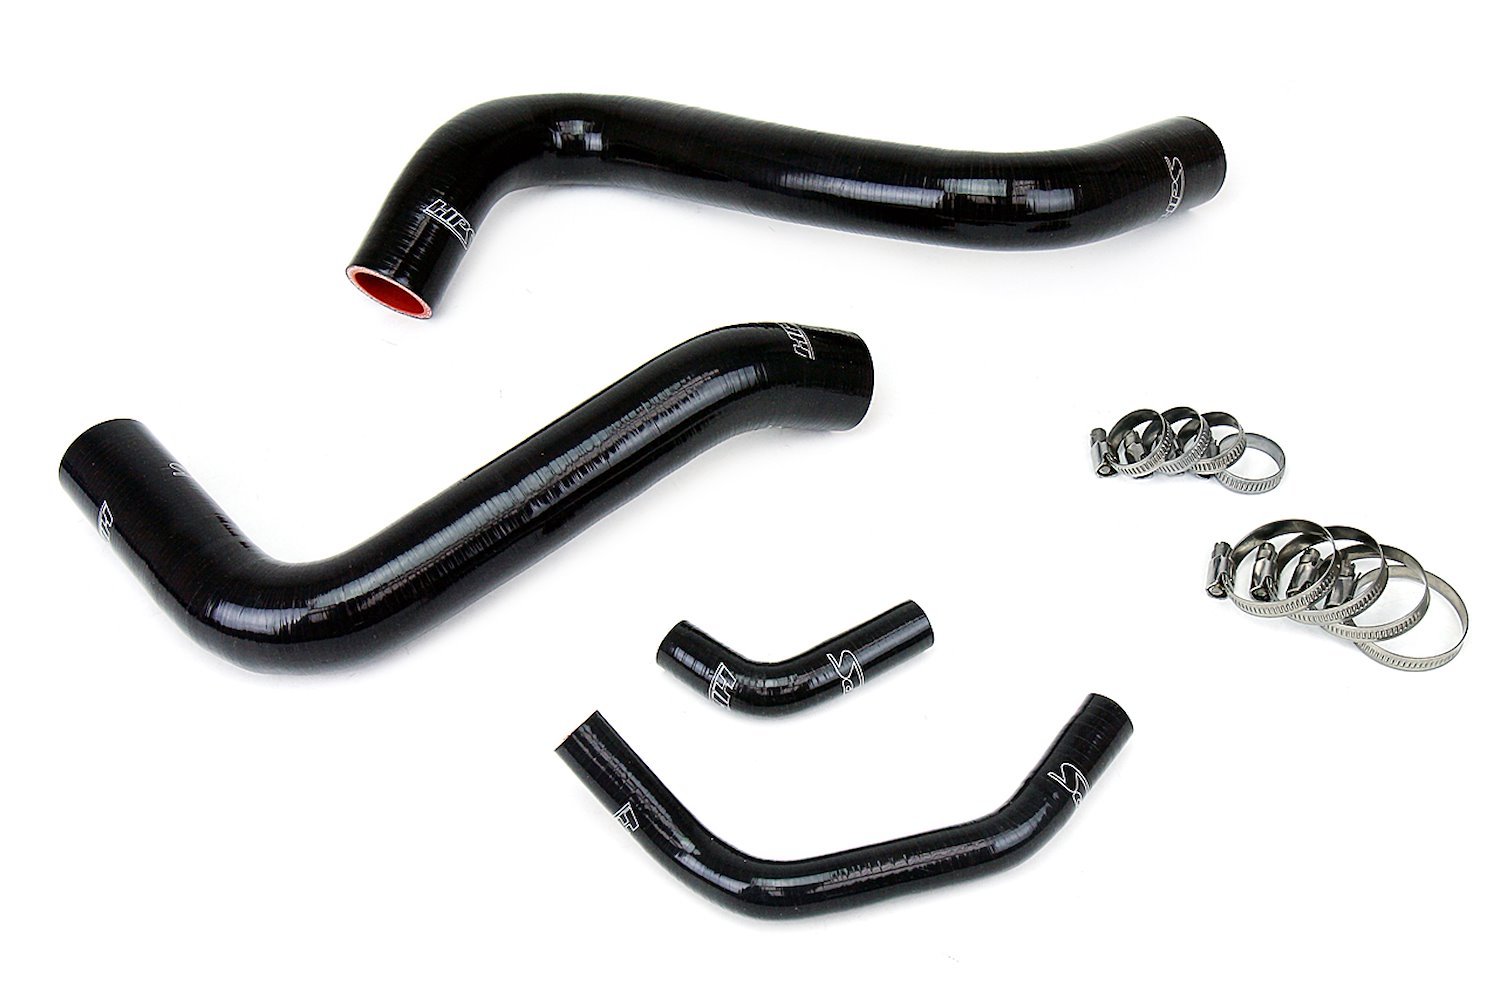 57-1467R-BLK Radiator Hose Kit, High-Temp 3-Ply Reinforced Silicone, Replace OEM Rubber Radiator Coolant Hoses